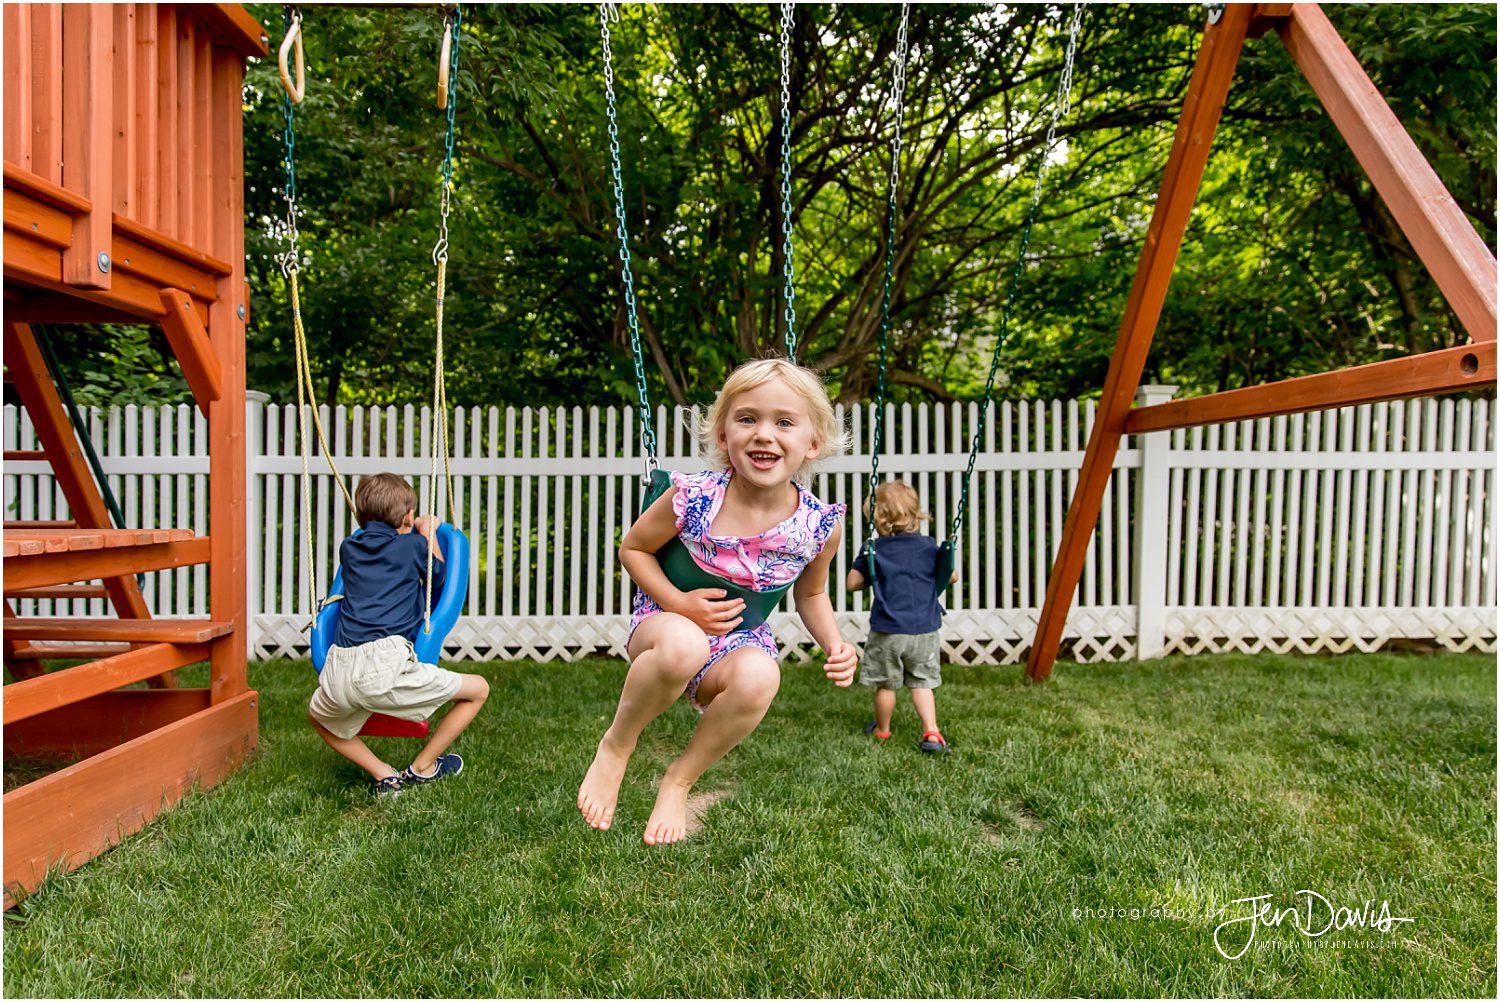 Updated Family Portraits at Home in Princeton NJ Family photographer